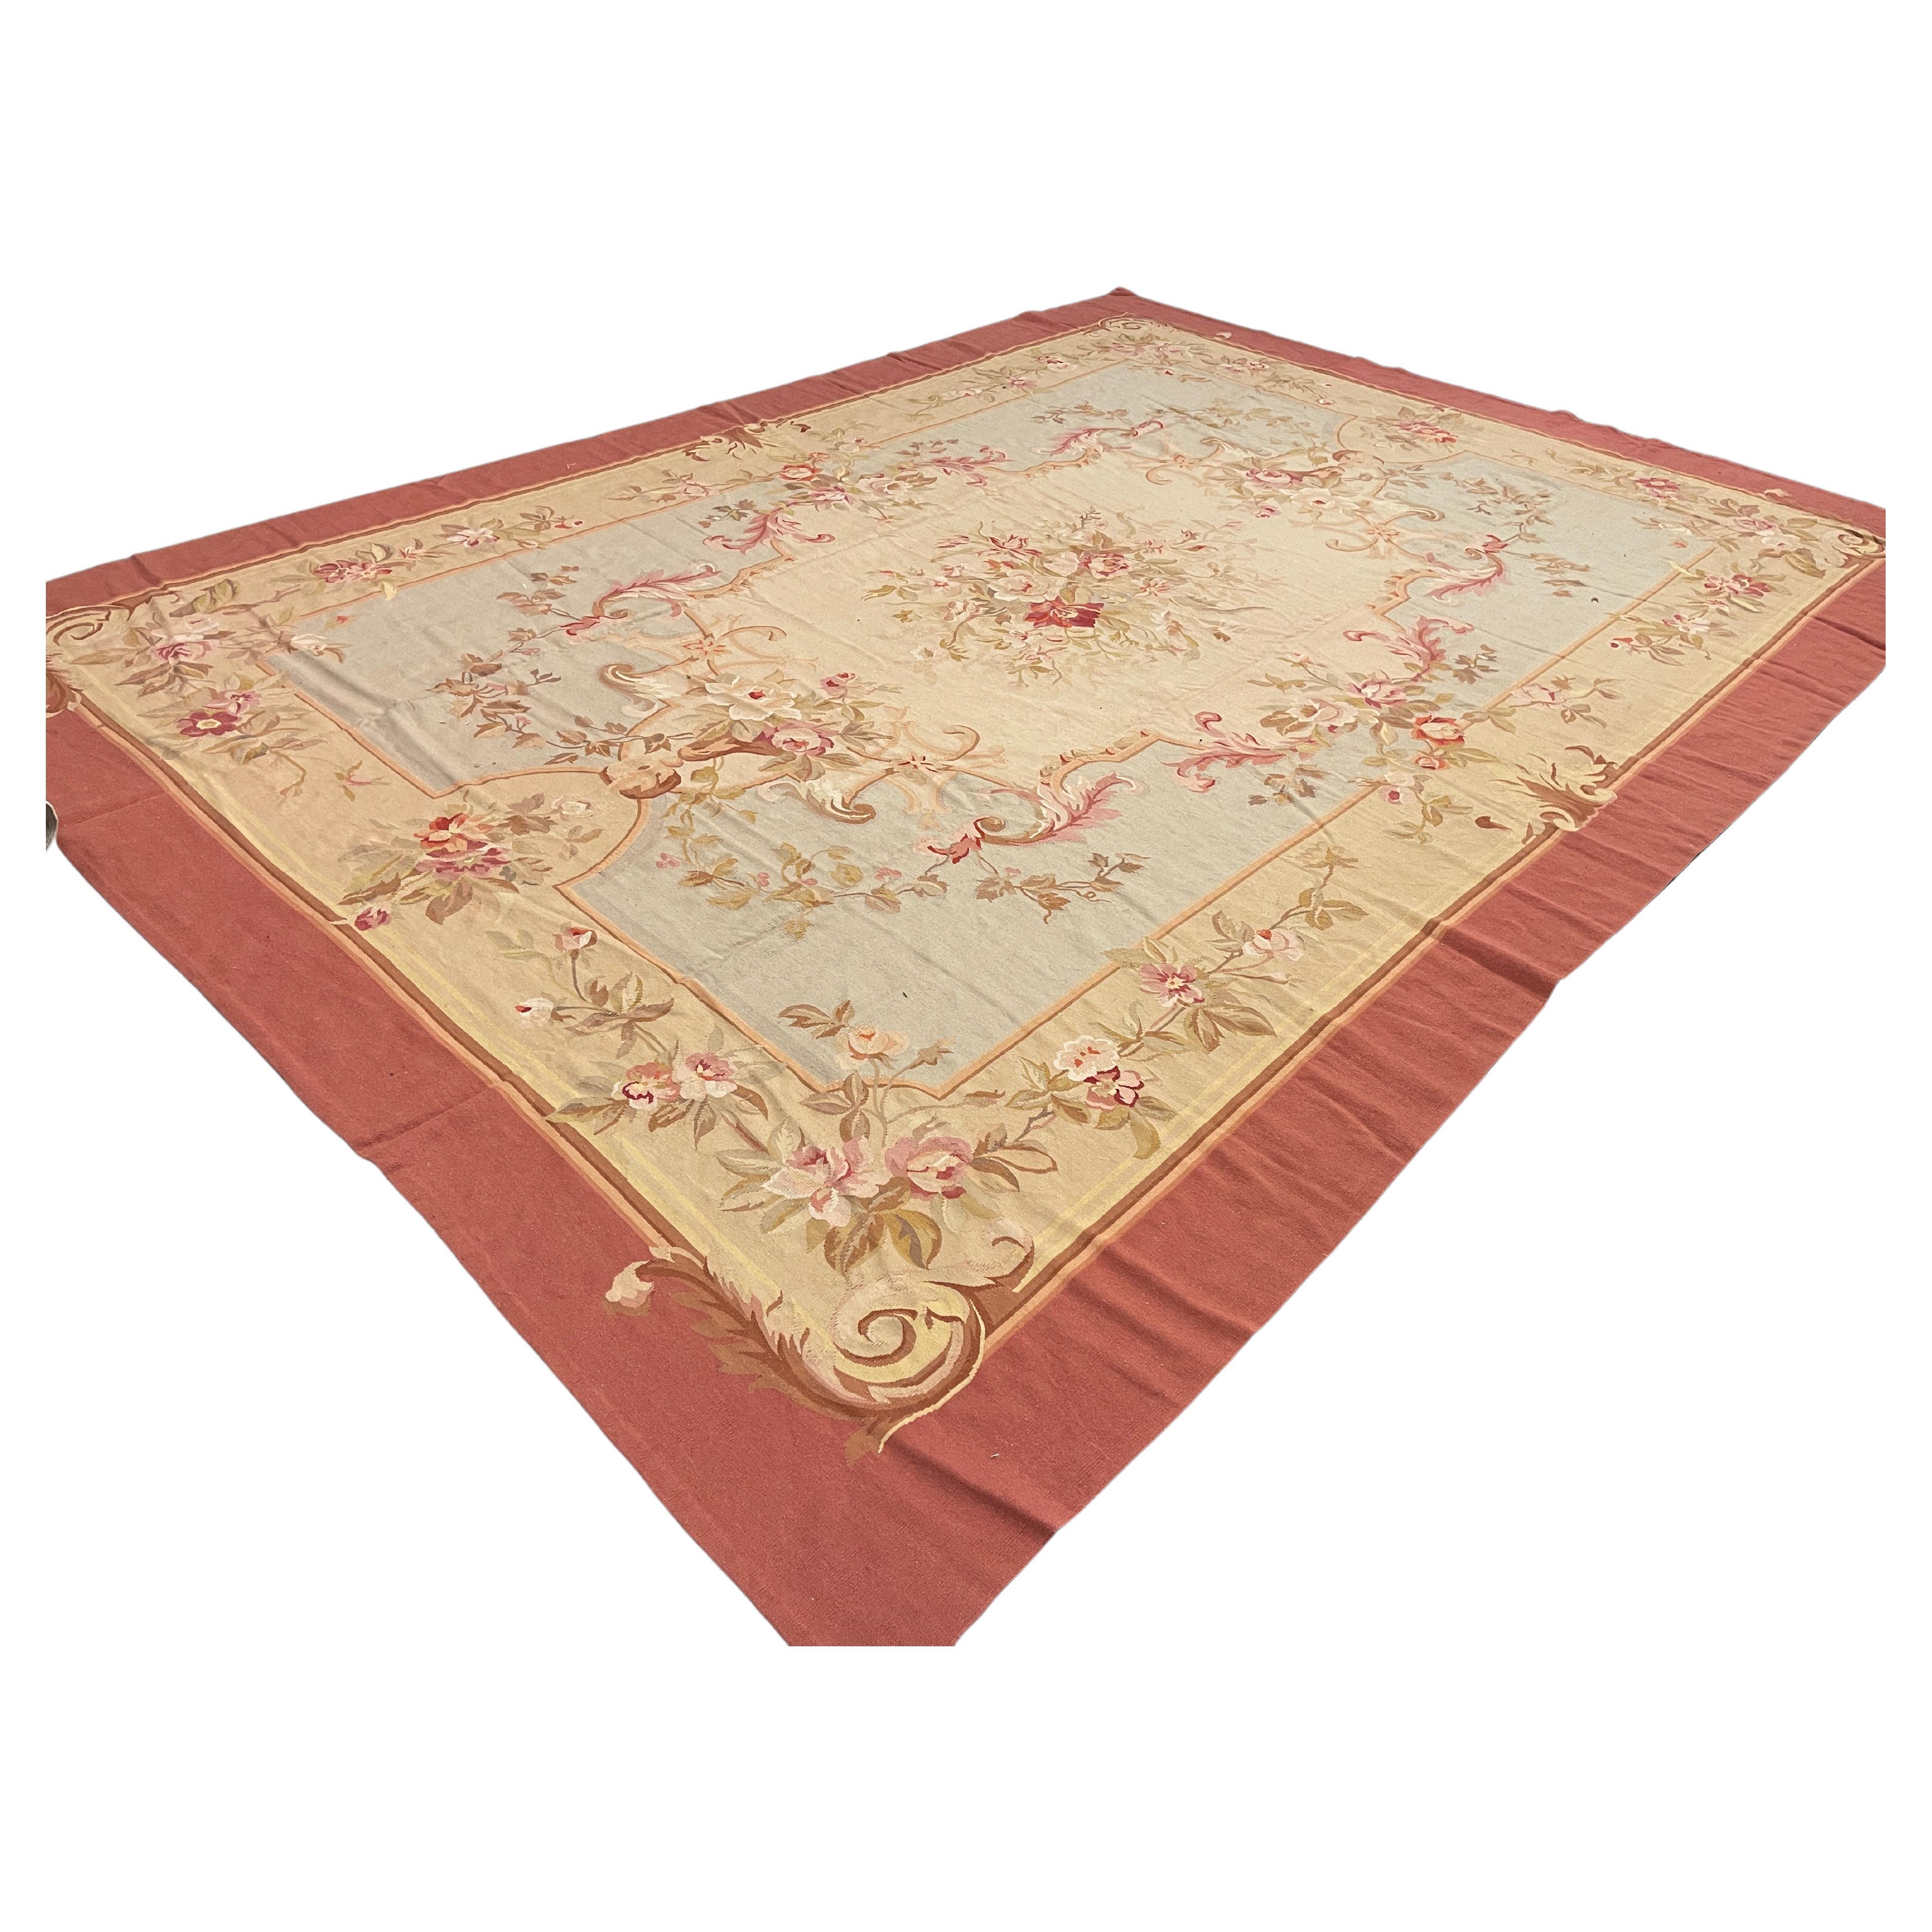 Featuring intricately woven motifs and emblems on a mixture of beige and light blue backgrounds through the centre. A highly detailed layered blush pink border encloses the handmade carpet for your elegant home decor.
This high-quality French